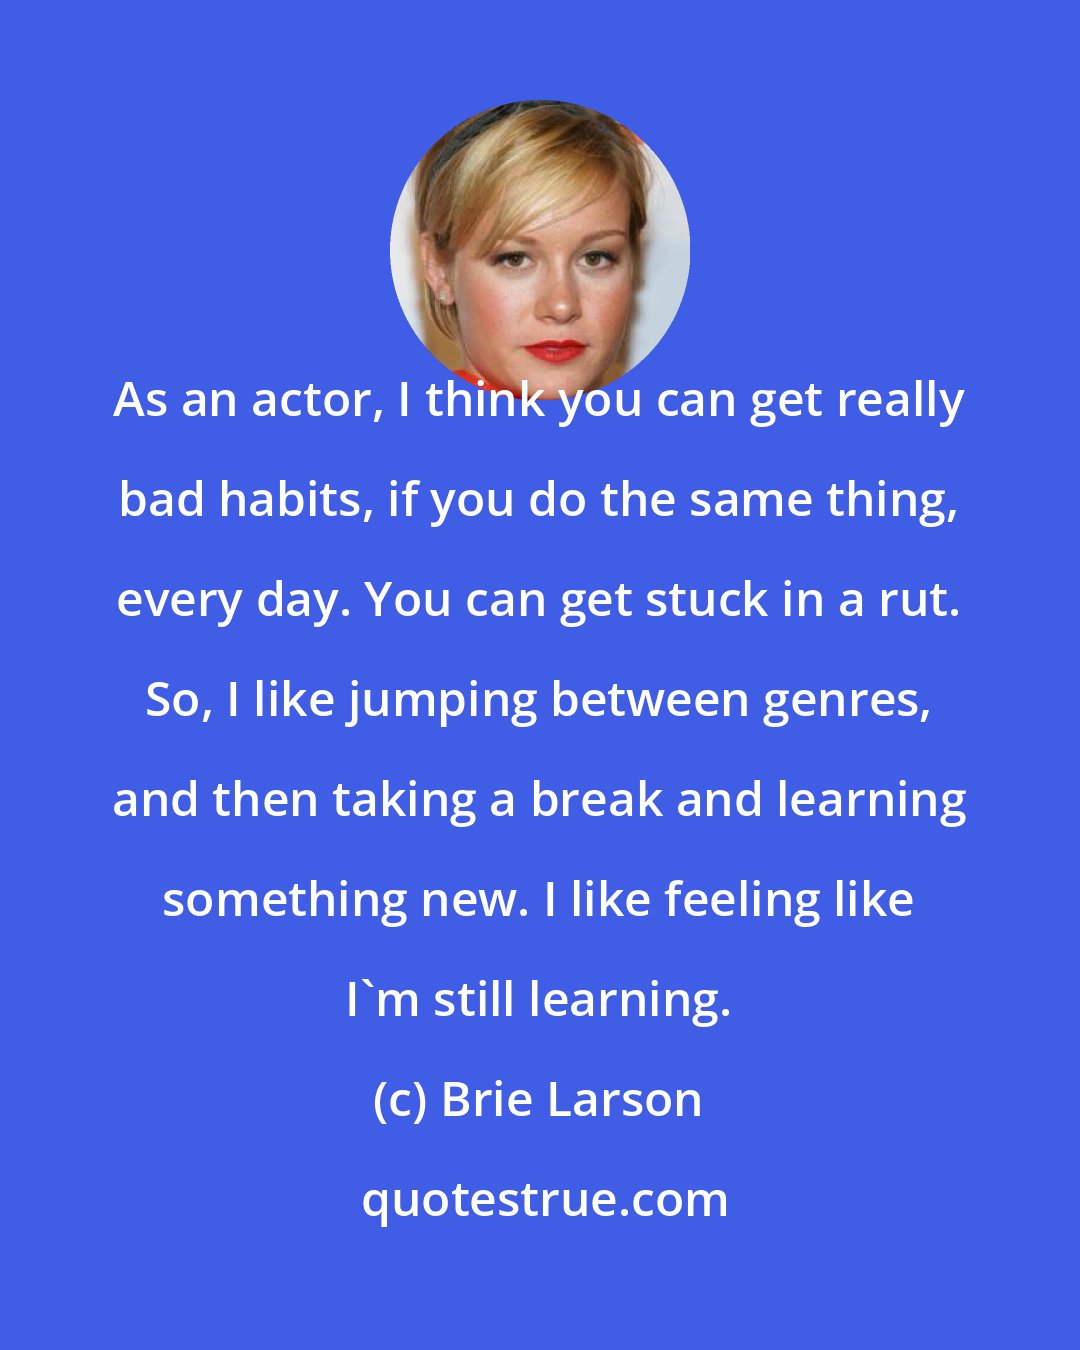 Brie Larson: As an actor, I think you can get really bad habits, if you do the same thing, every day. You can get stuck in a rut. So, I like jumping between genres, and then taking a break and learning something new. I like feeling like I'm still learning.